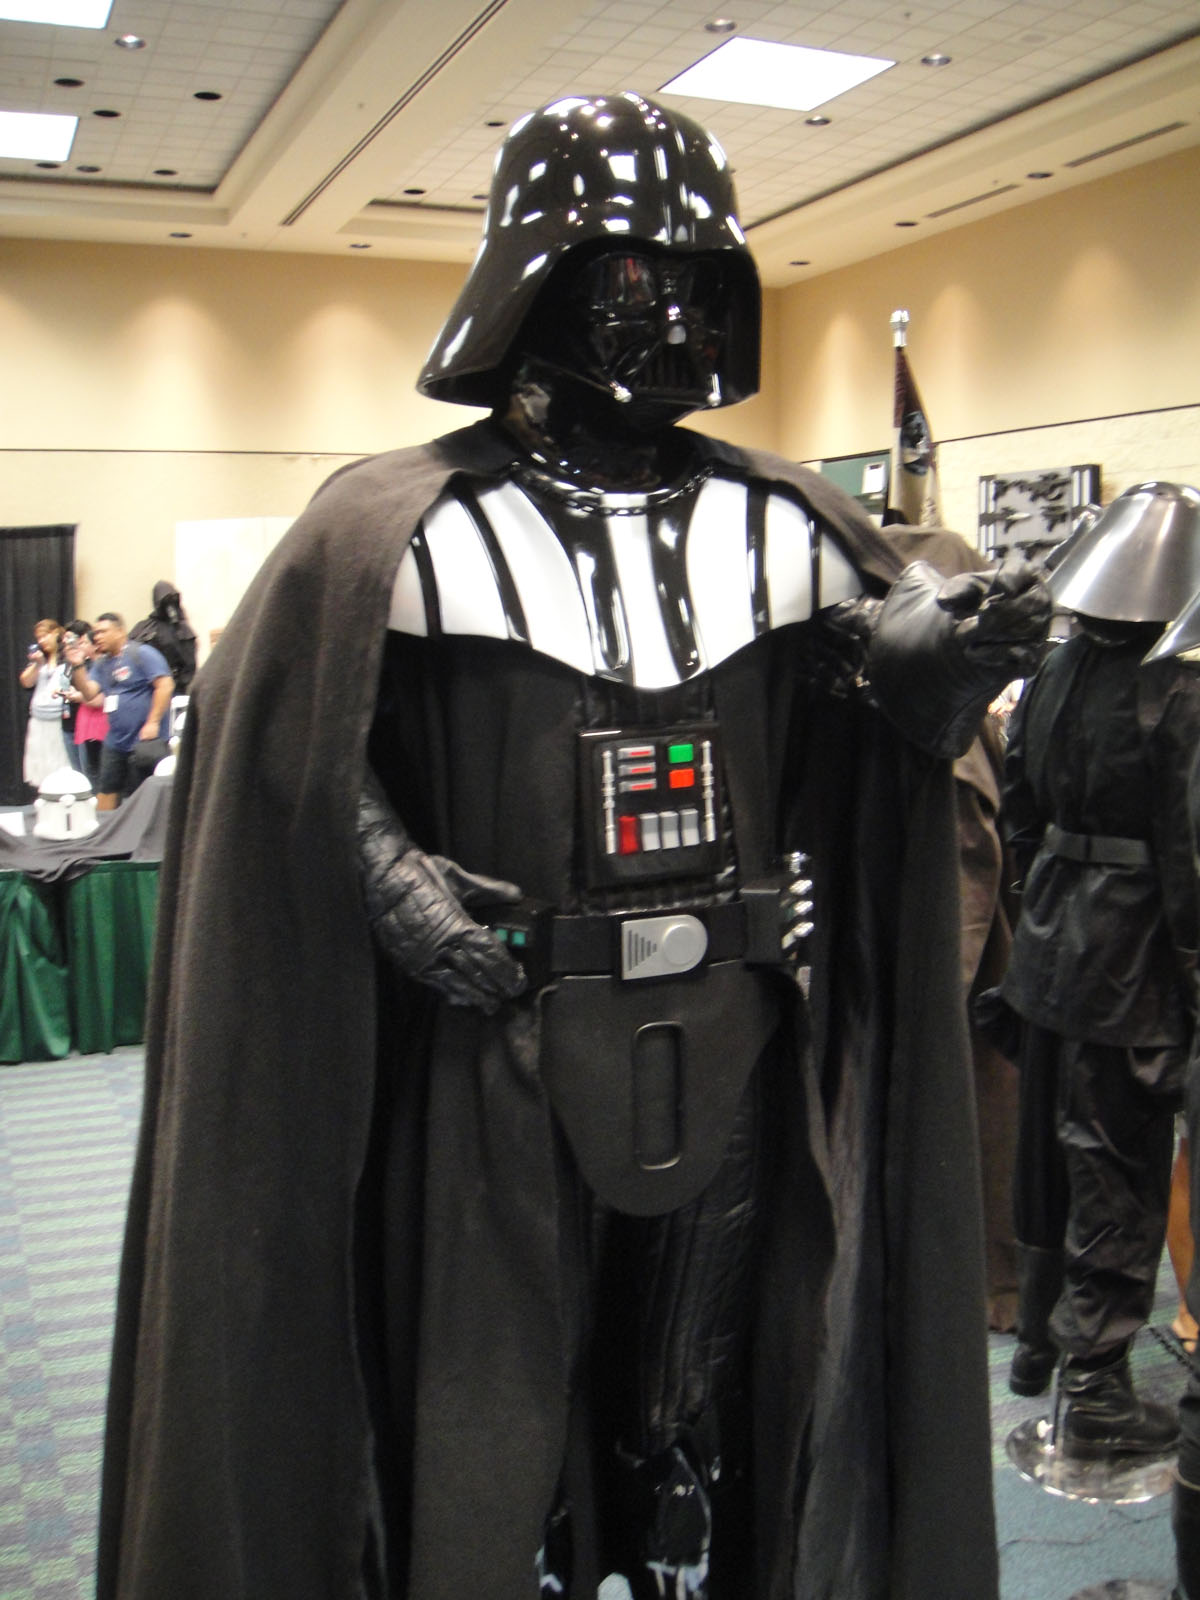 a darth vader costume is displayed with people looking on